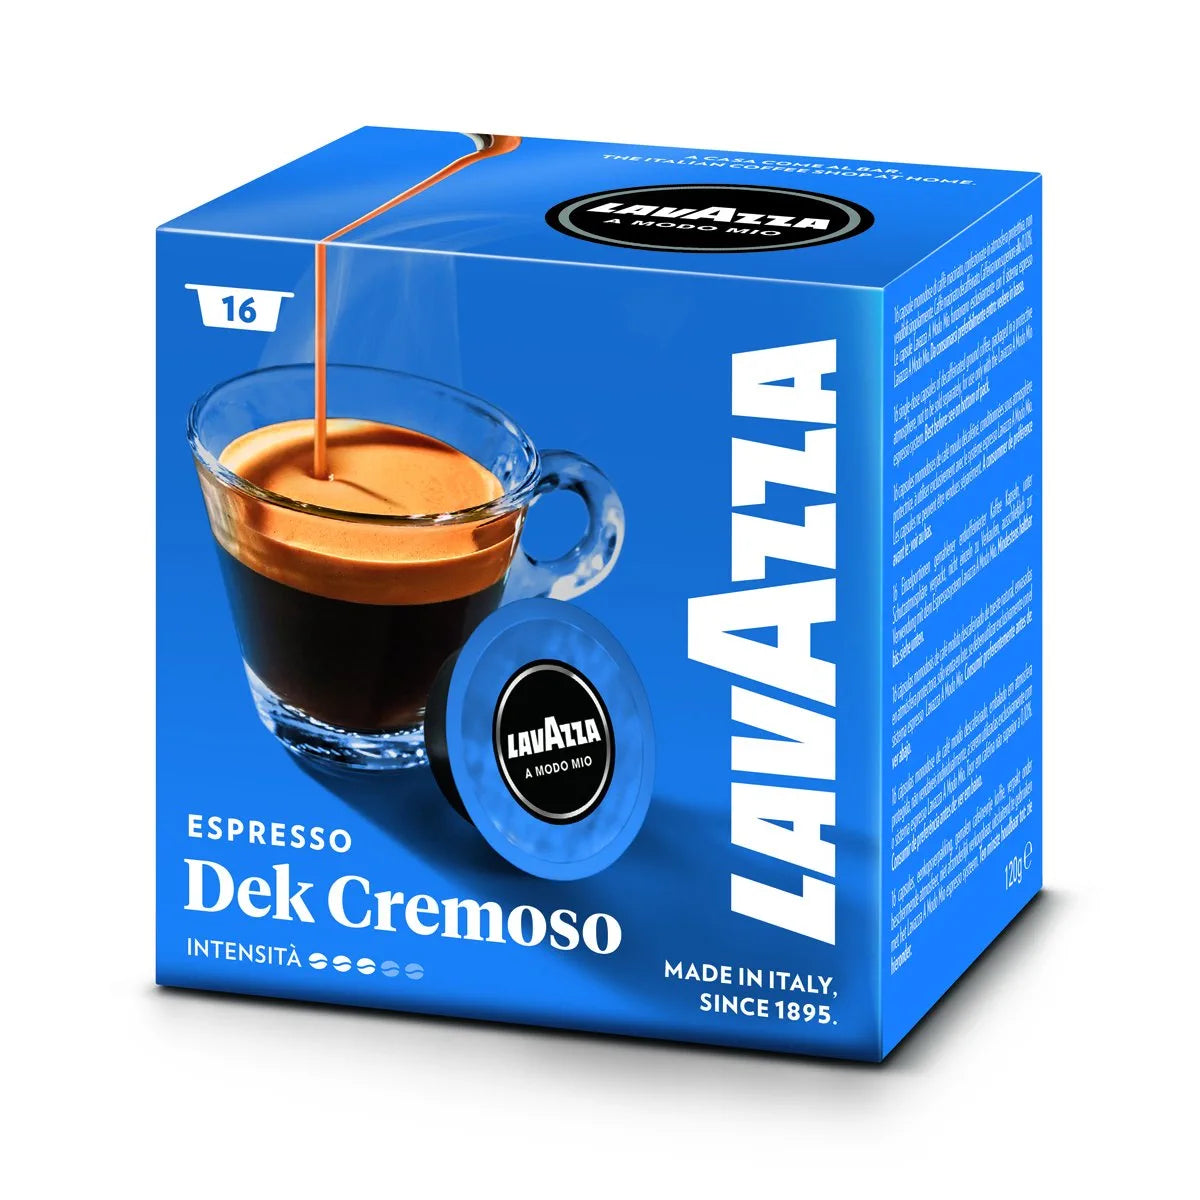 Lavazza - The espresso of age-old Italian tradition. With notes of caramel  and chocolate, our A Modo Mio Passionale capsules are the perfect choice  for your morning cappuccino. #Lavazza #LavazzaAU #LavazzaCoffee #AModoMio #